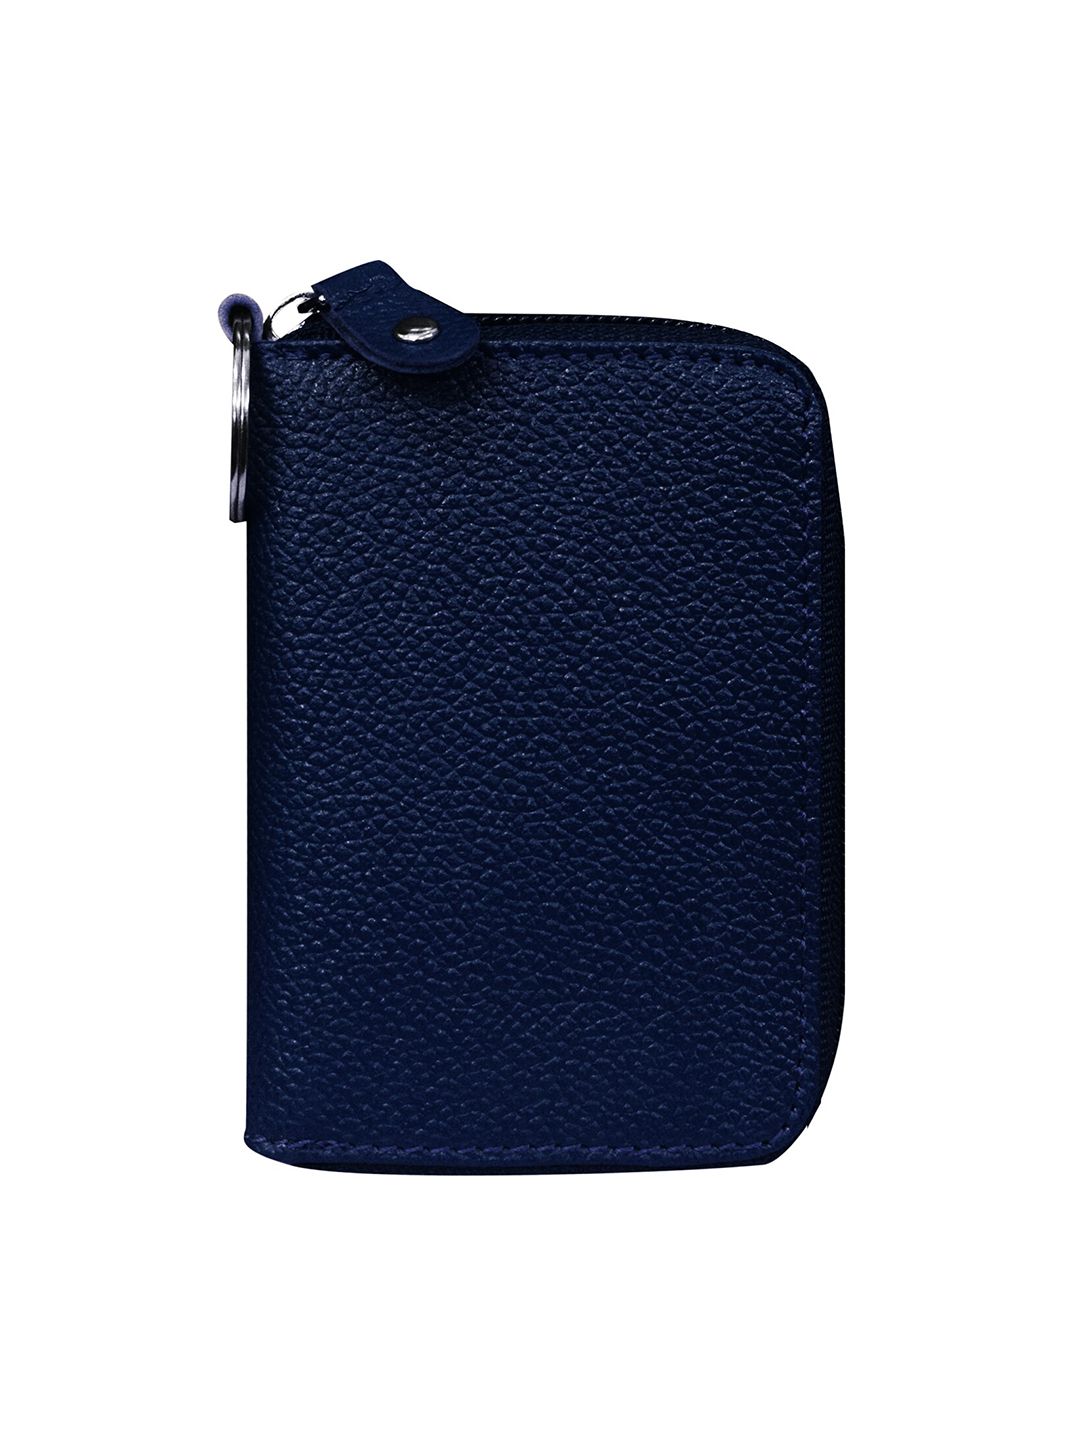 ABYS Unisex Navy Blue Solid Leather Card Holder Price in India